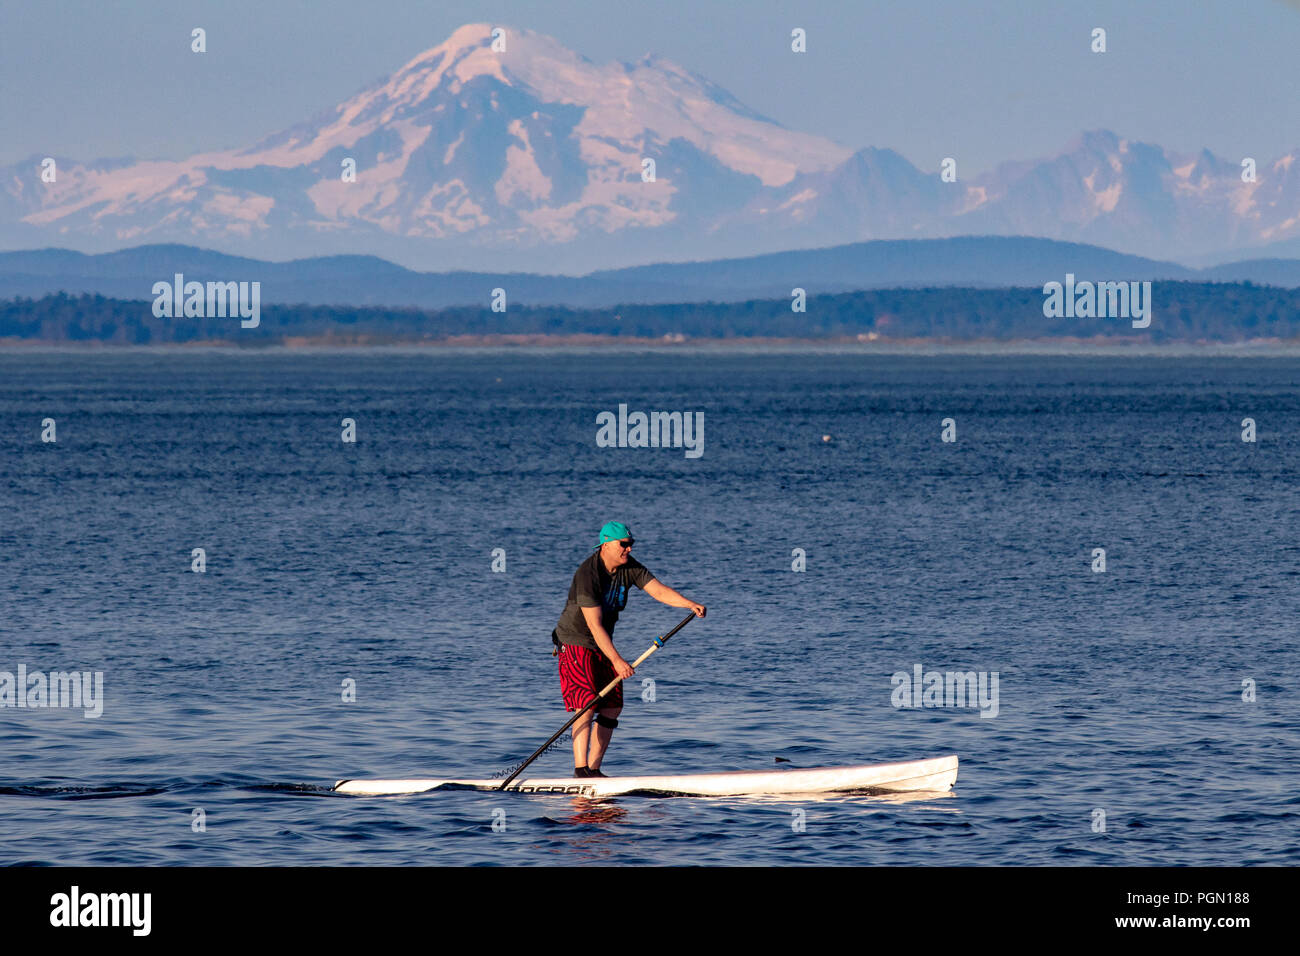 Stand-up Paddleboarder off Cattle Point in Uplands Park, Oak Bay near Victoria, Vancouver Island, British Columbia, Canada Stock Photo